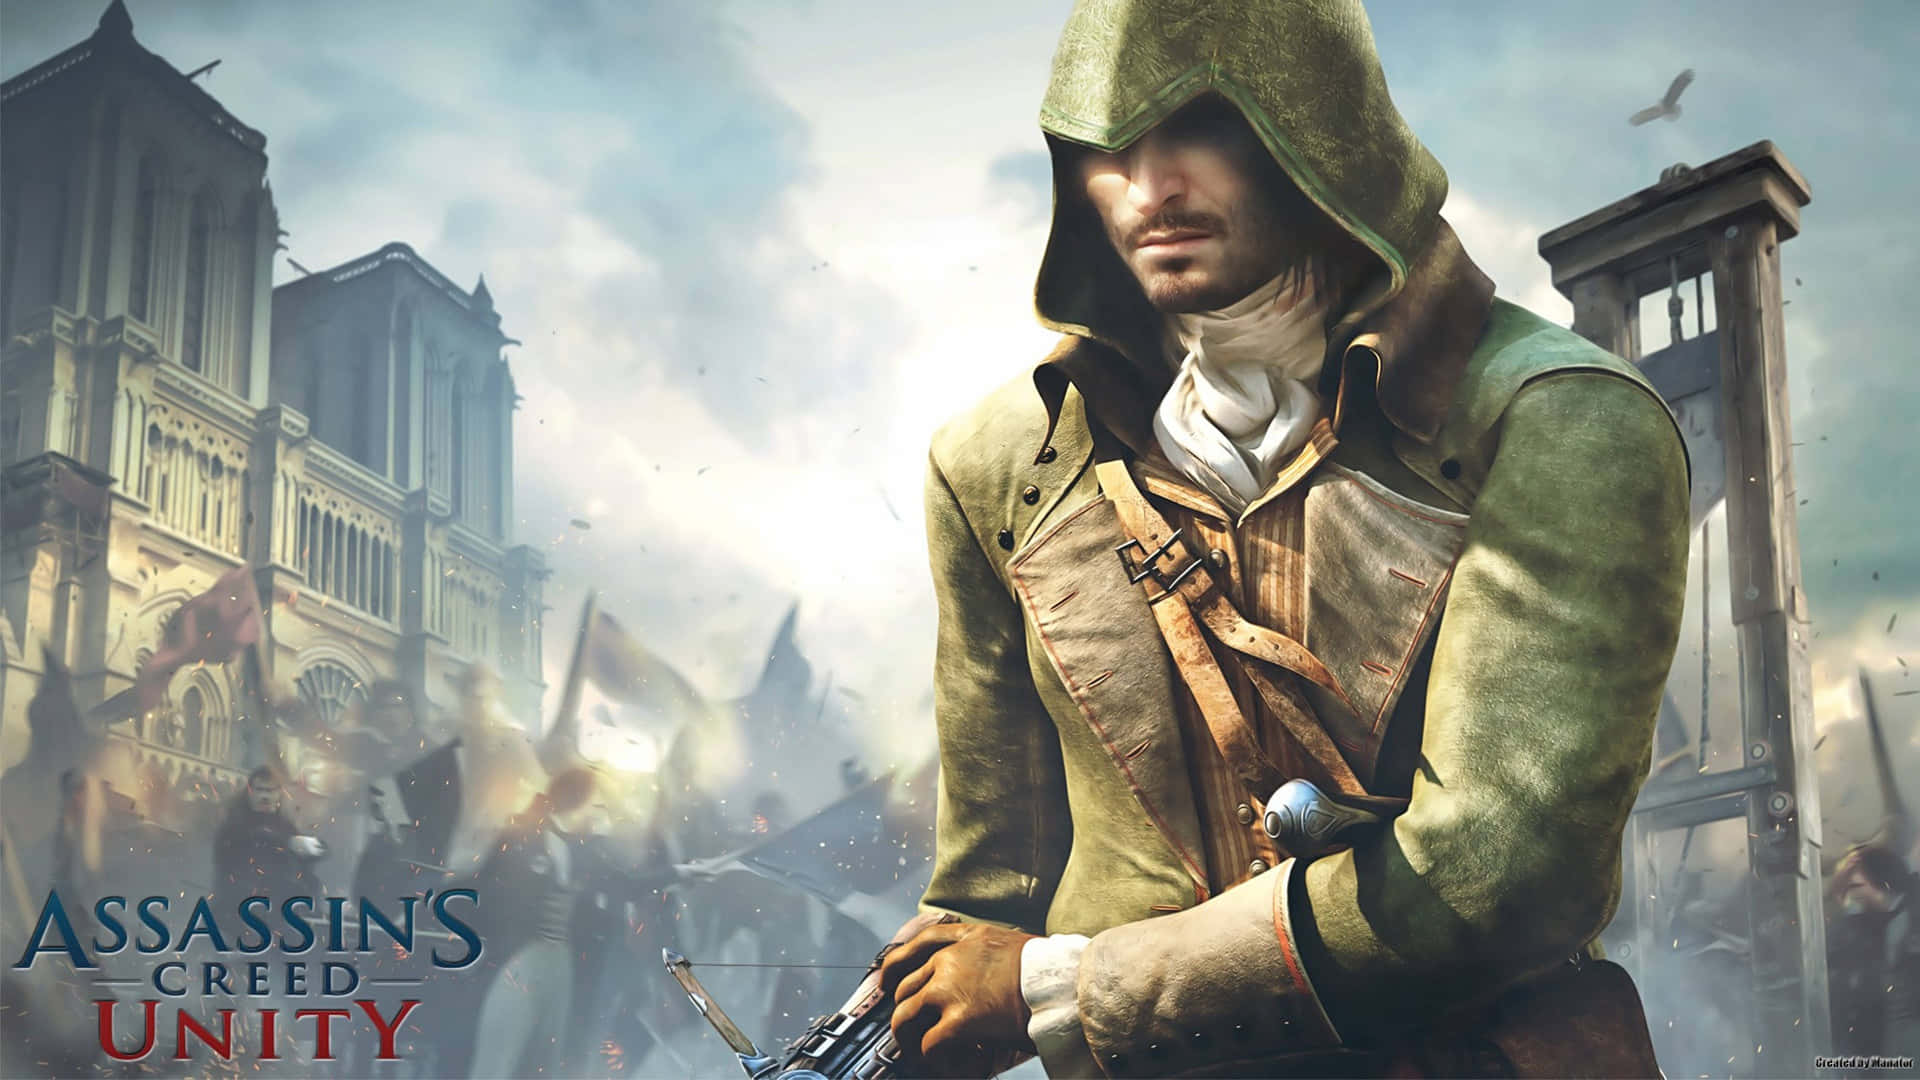 Epic Arno Dorian Action in Assassin's Creed Unity Wallpaper